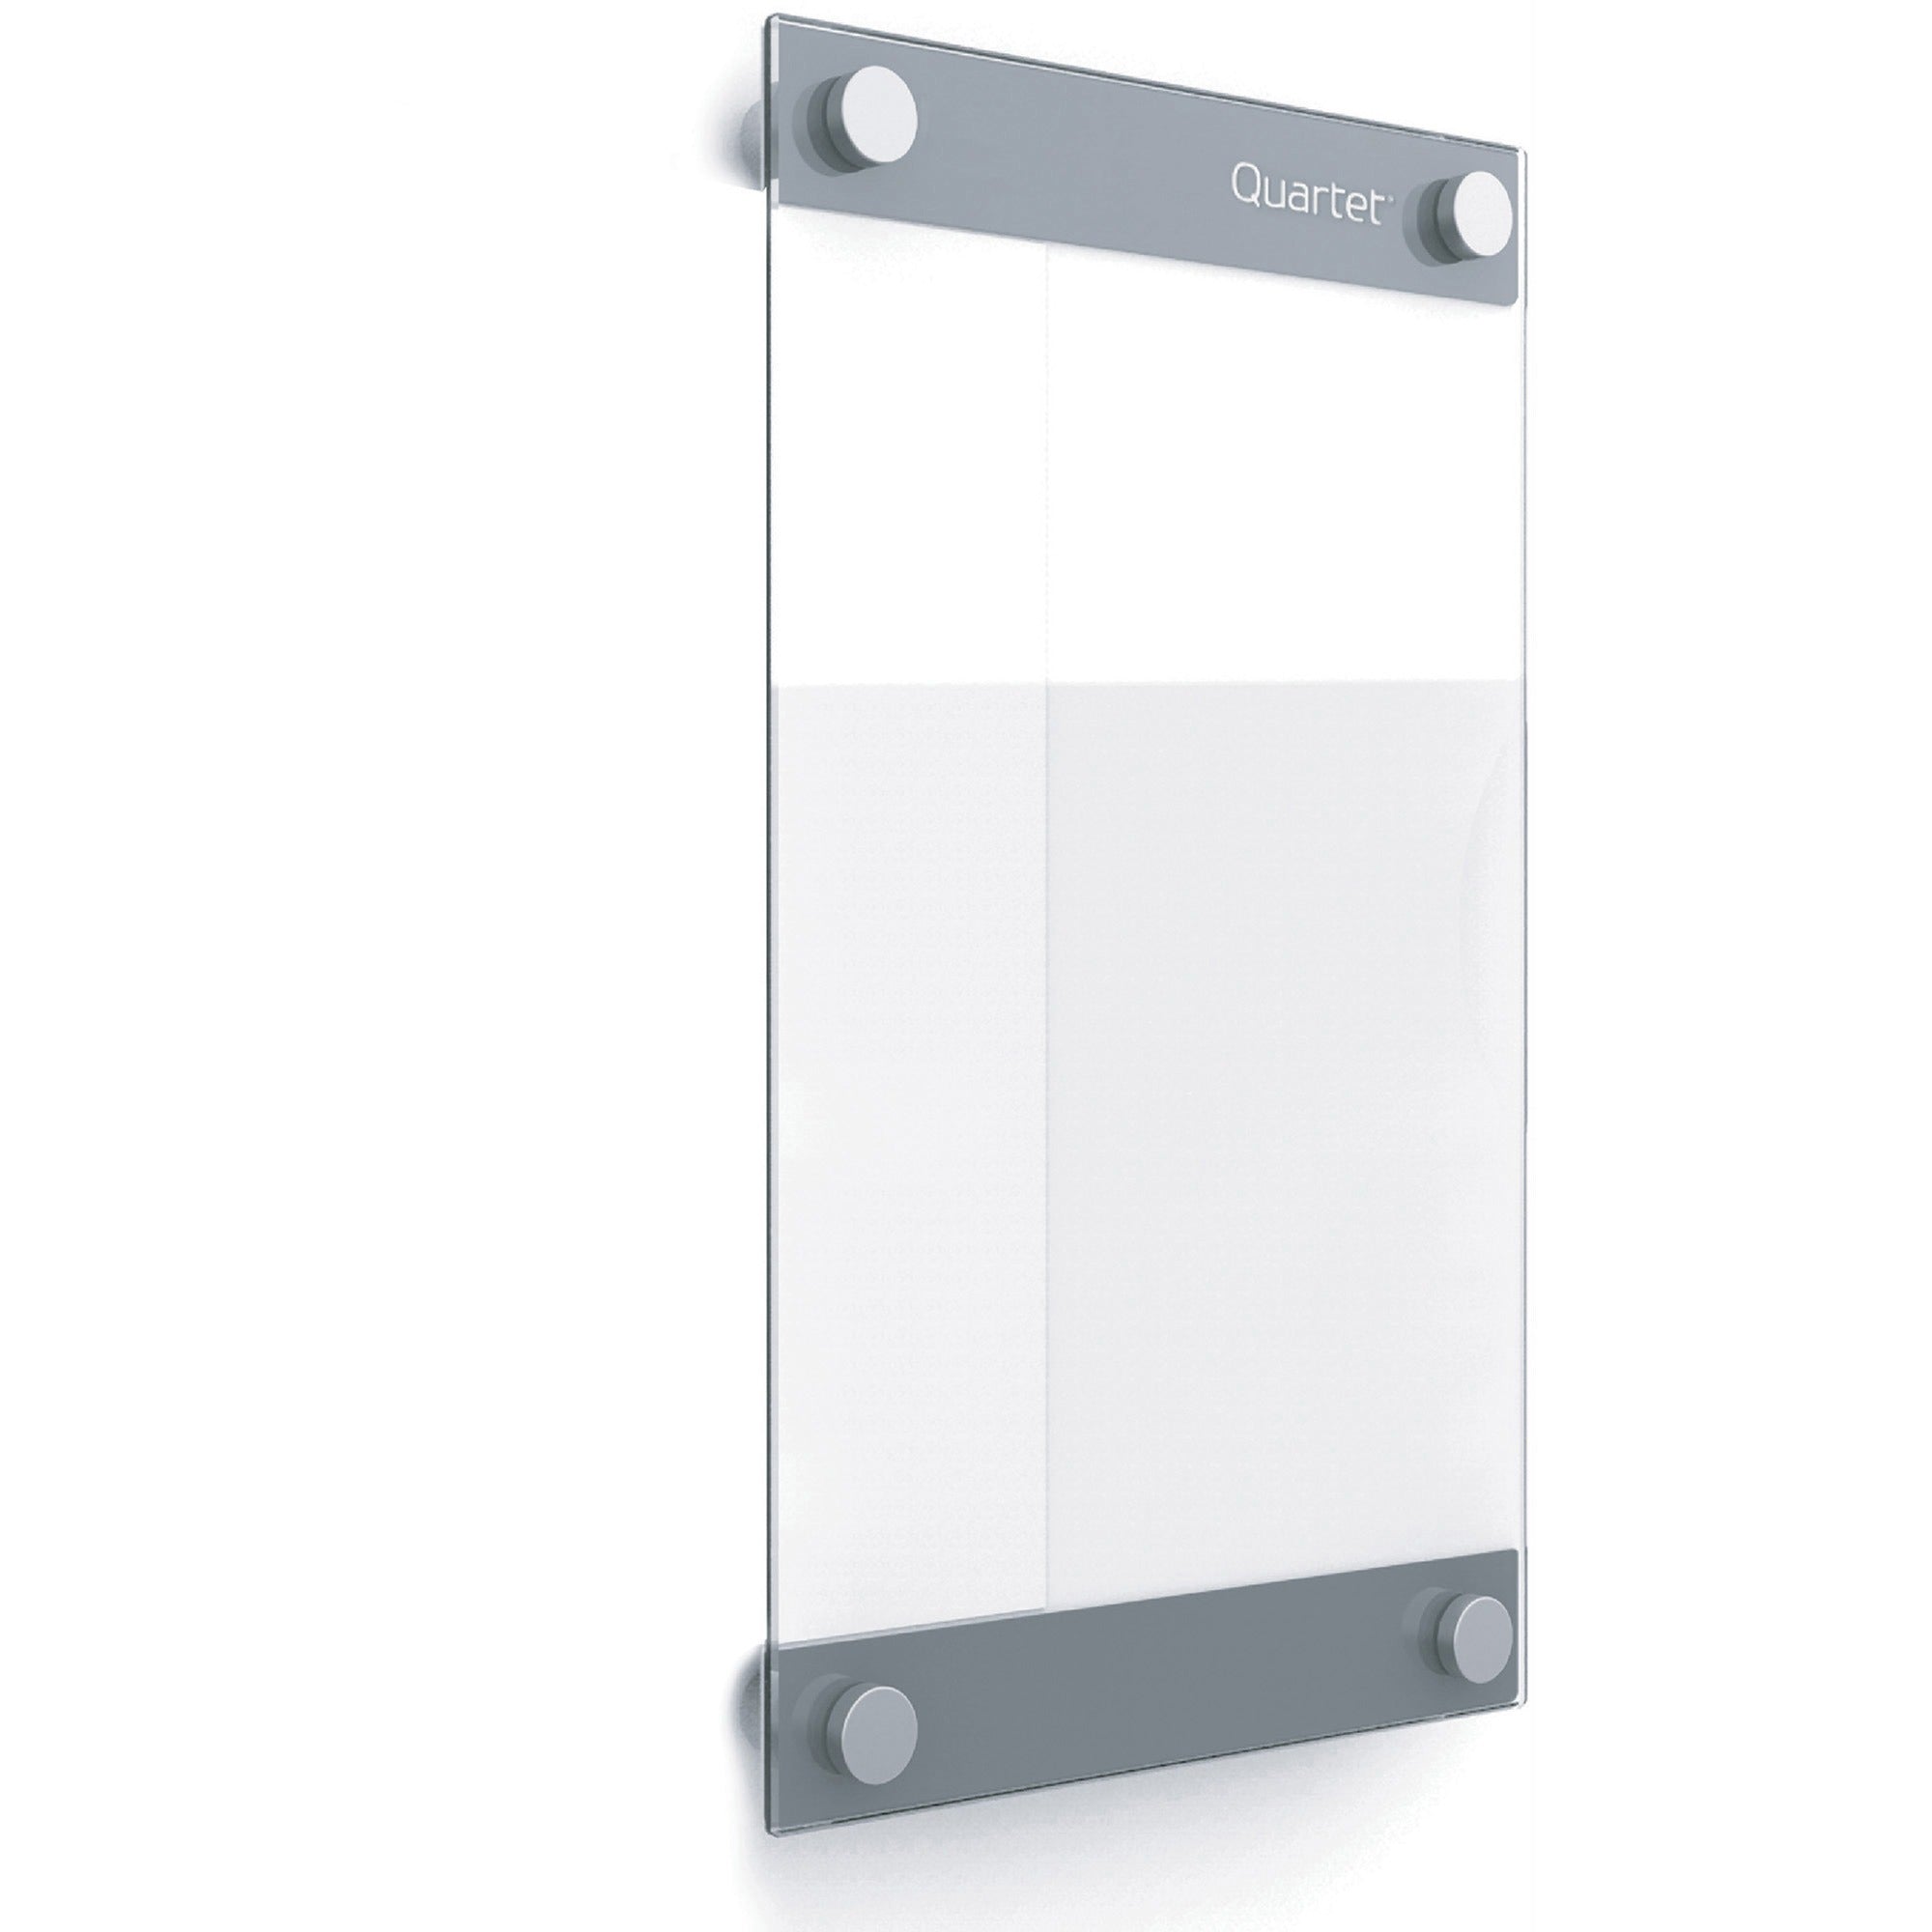 quartet-infinity-customizable-glass-dry-erase-board-11-09-ft-width-x-17-14-ft-height-clear-white-glass-surface-rectangle-horizontal-vertical-magnetic-assembly-required-1-each_qrtgi1117 - 1